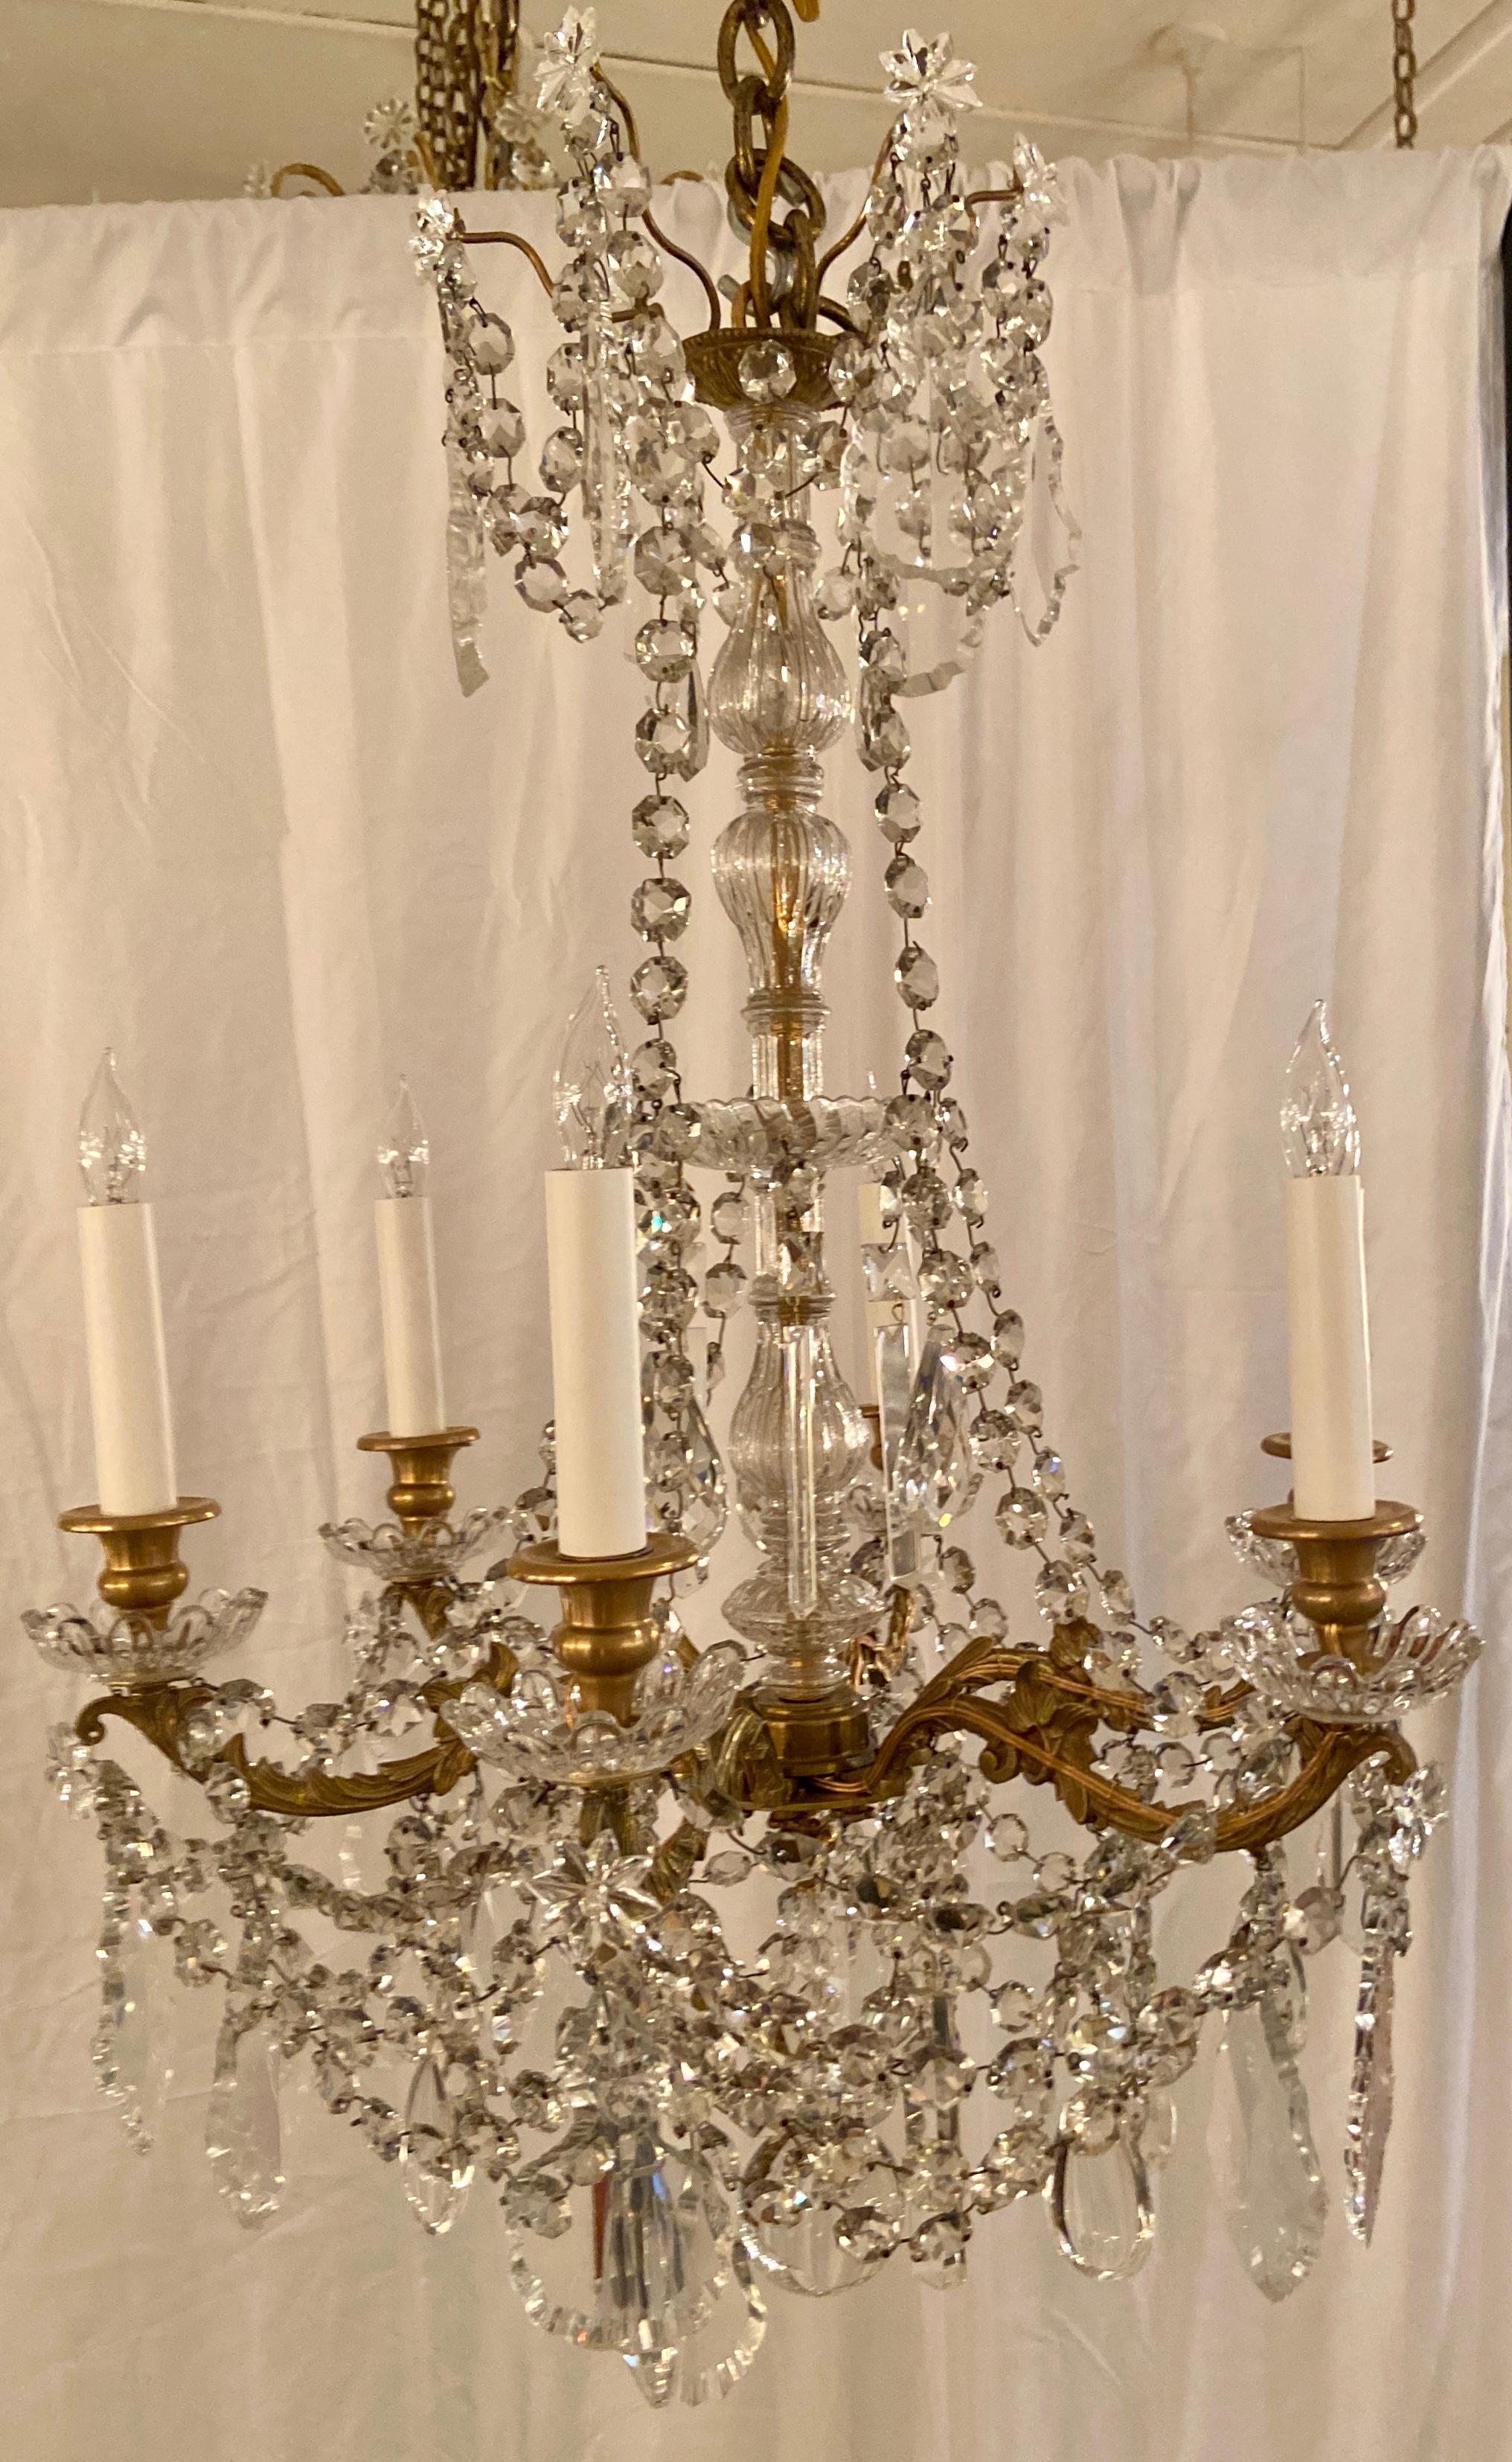 Antique French Baccarat crystal and gold bronze 6-light chandelier, Circa 1890.